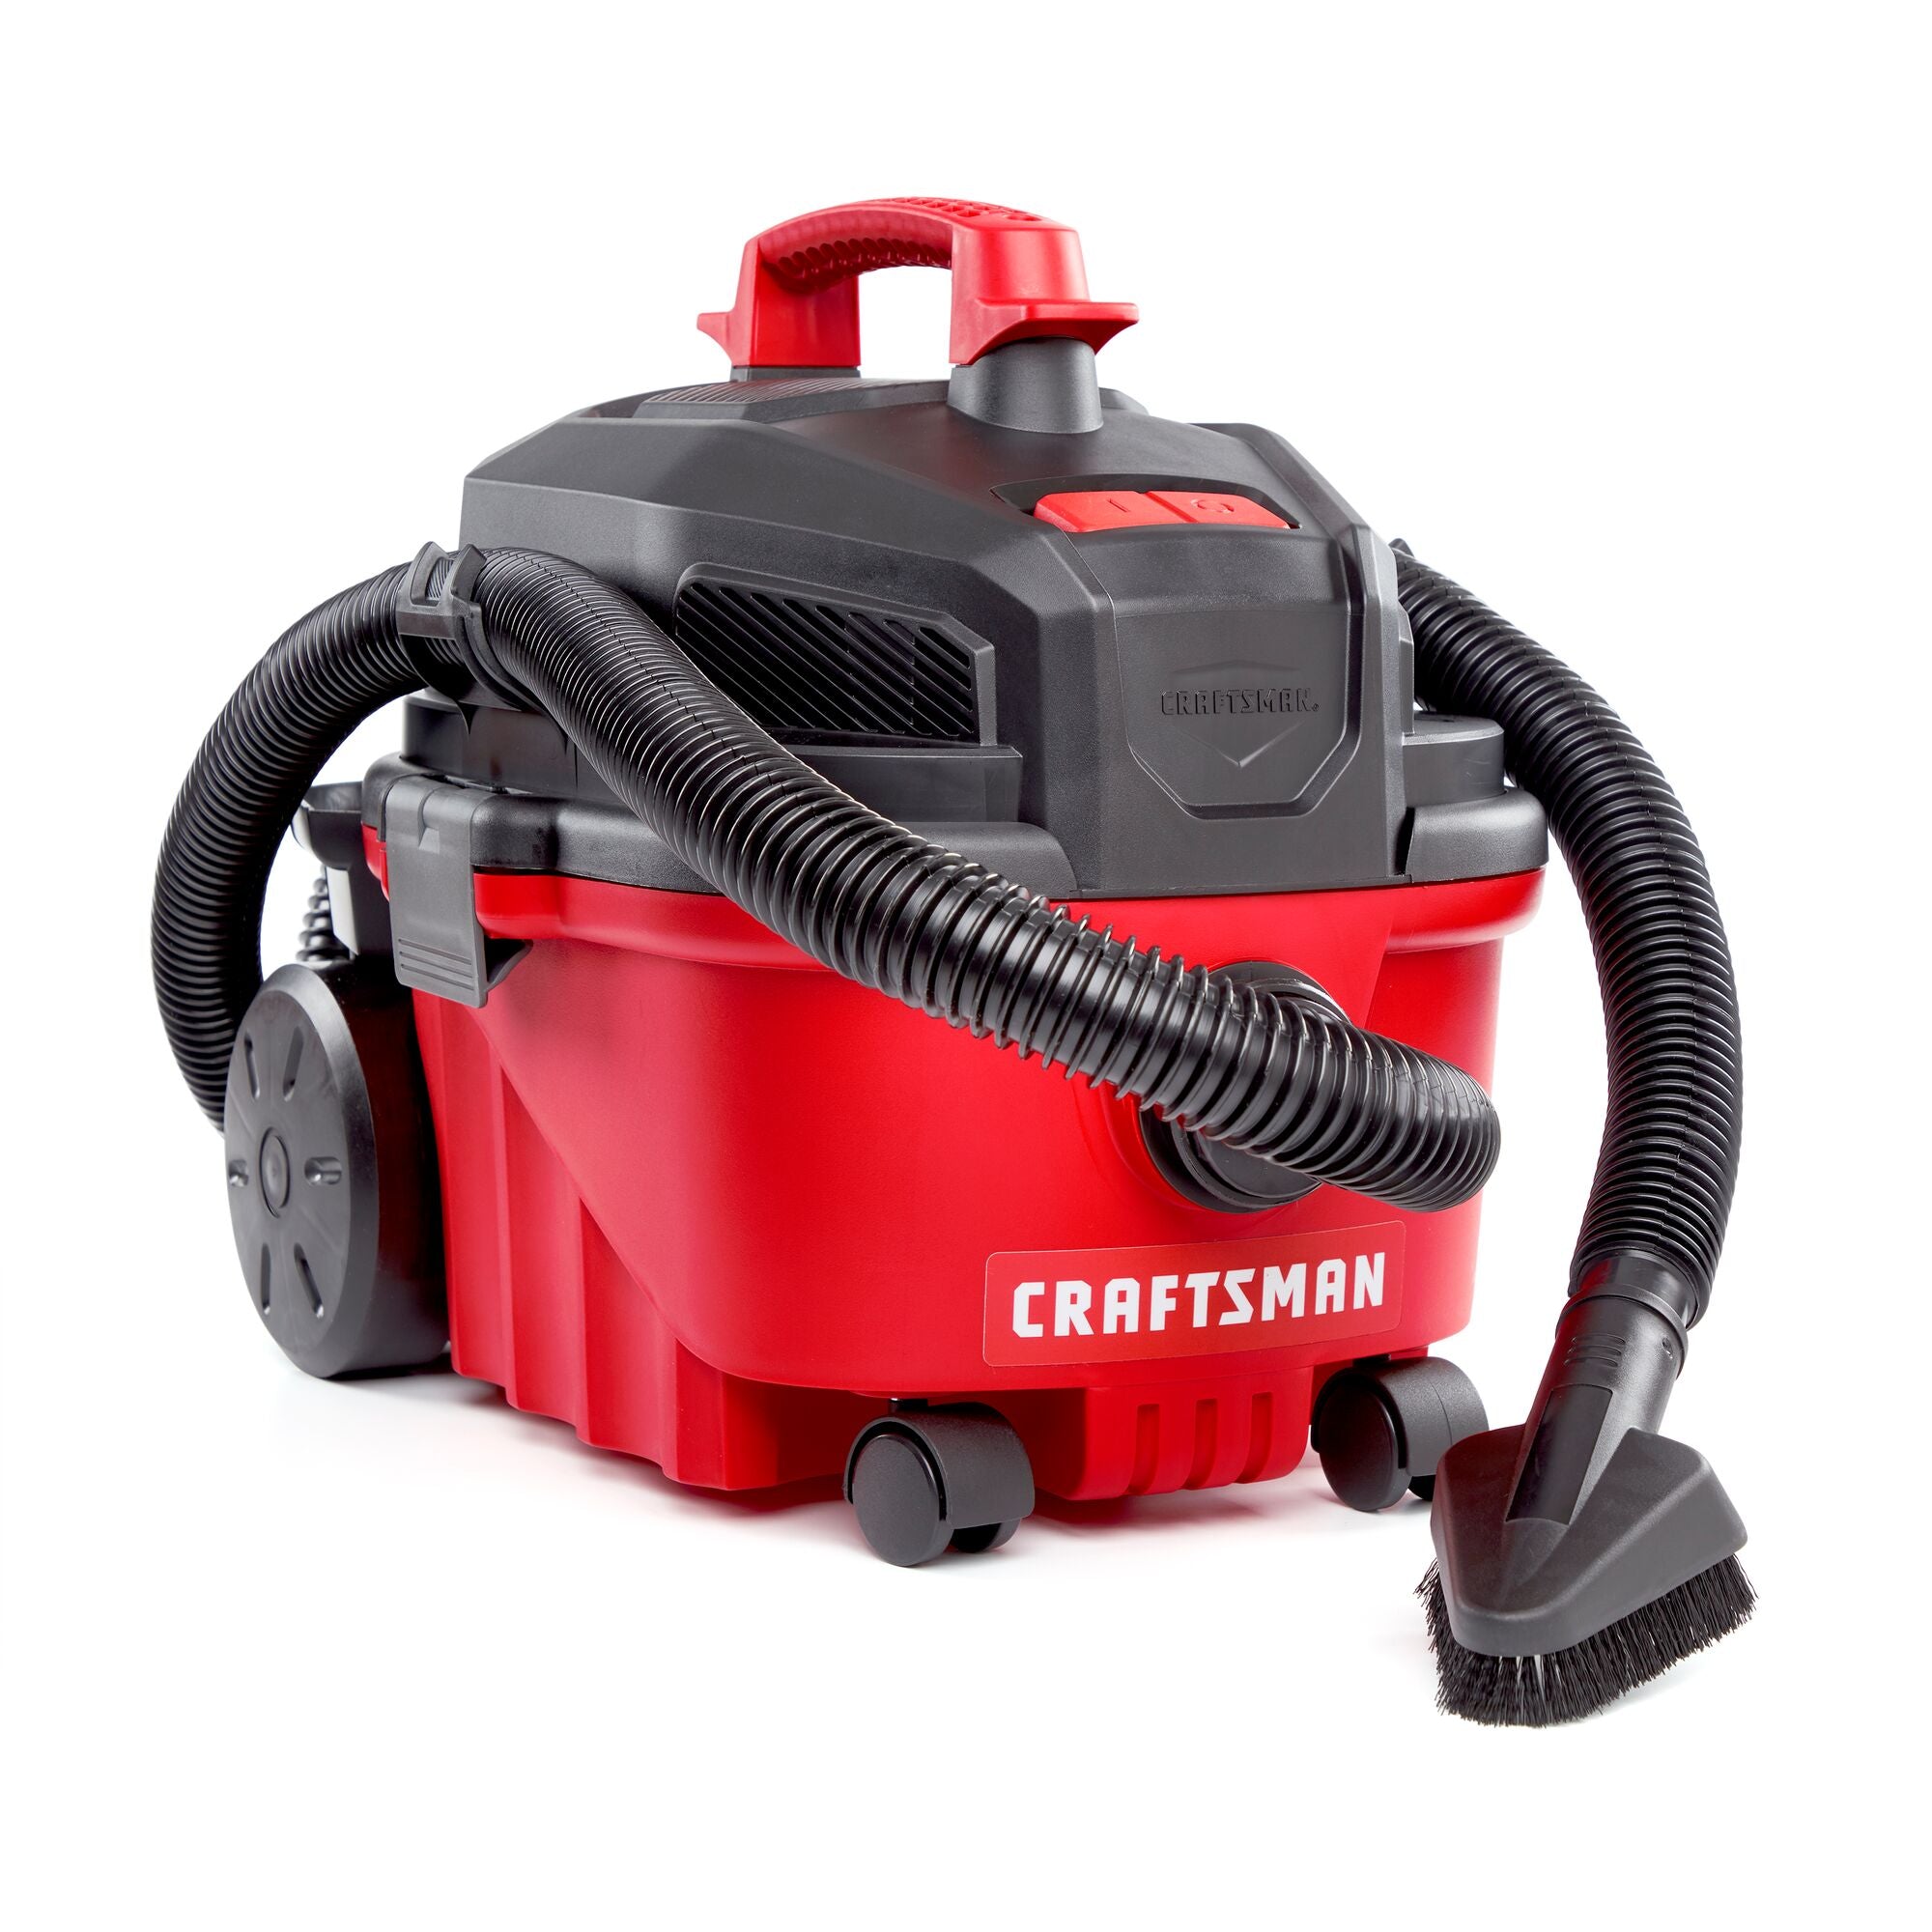 Front angled view of CRAFTSMAN 4 gallon shop vacuum with 1-1/4 inch hose, dusting brush attached